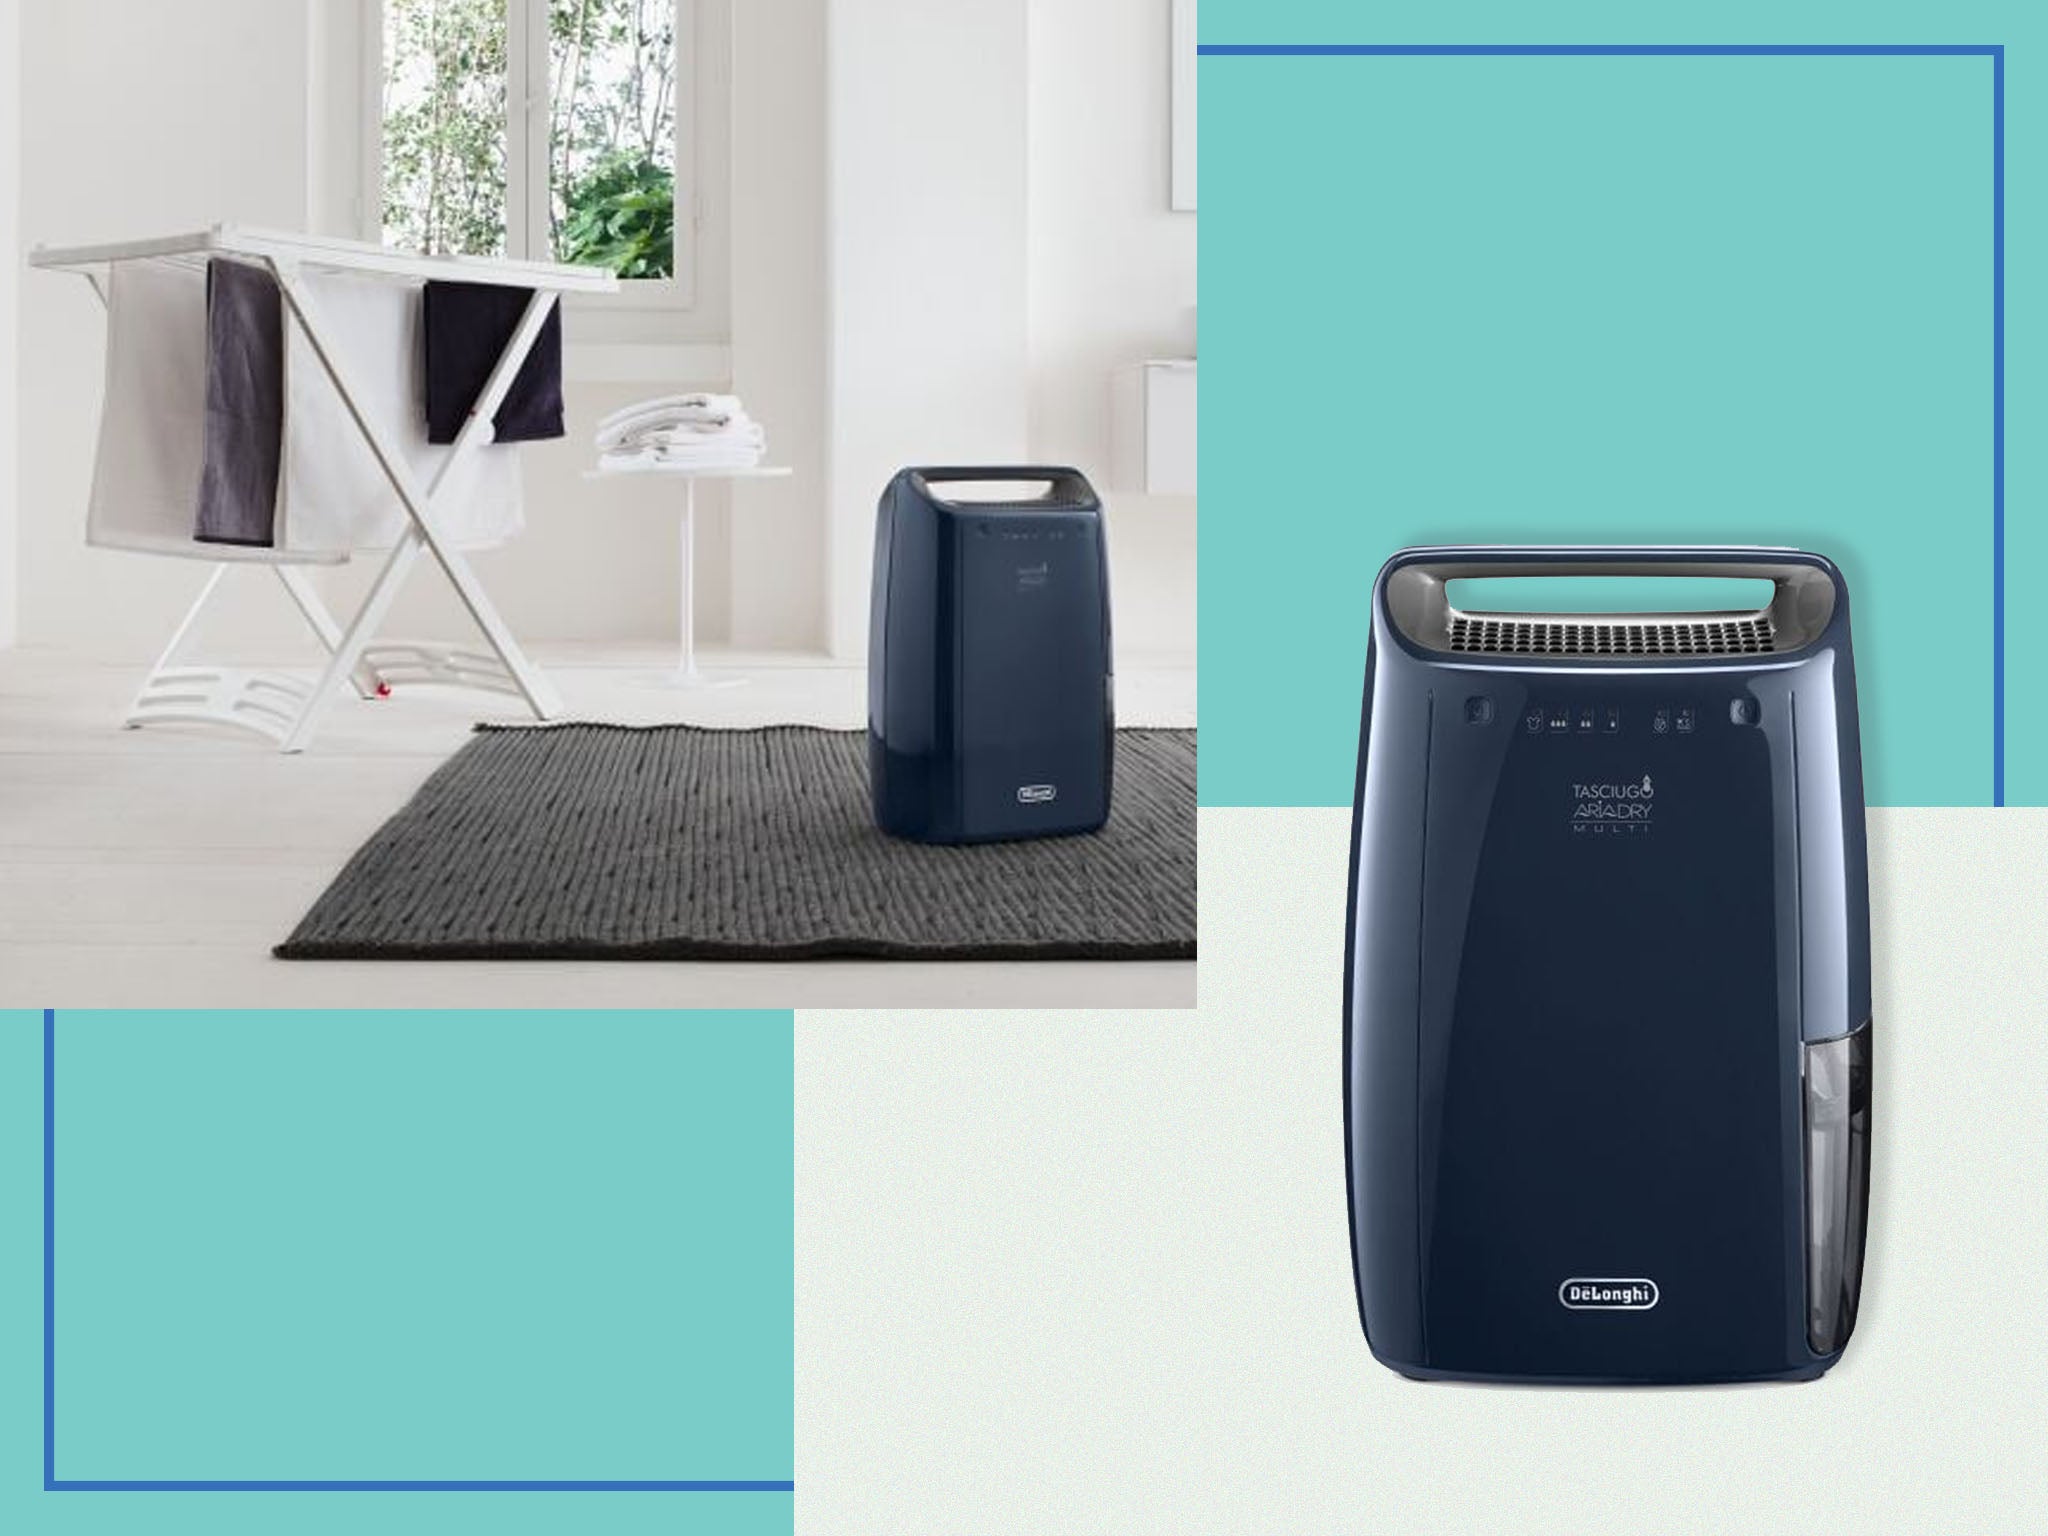 Heated airer vs dehumidifier – what's the most cost-effective way to dry  clothes indoors?